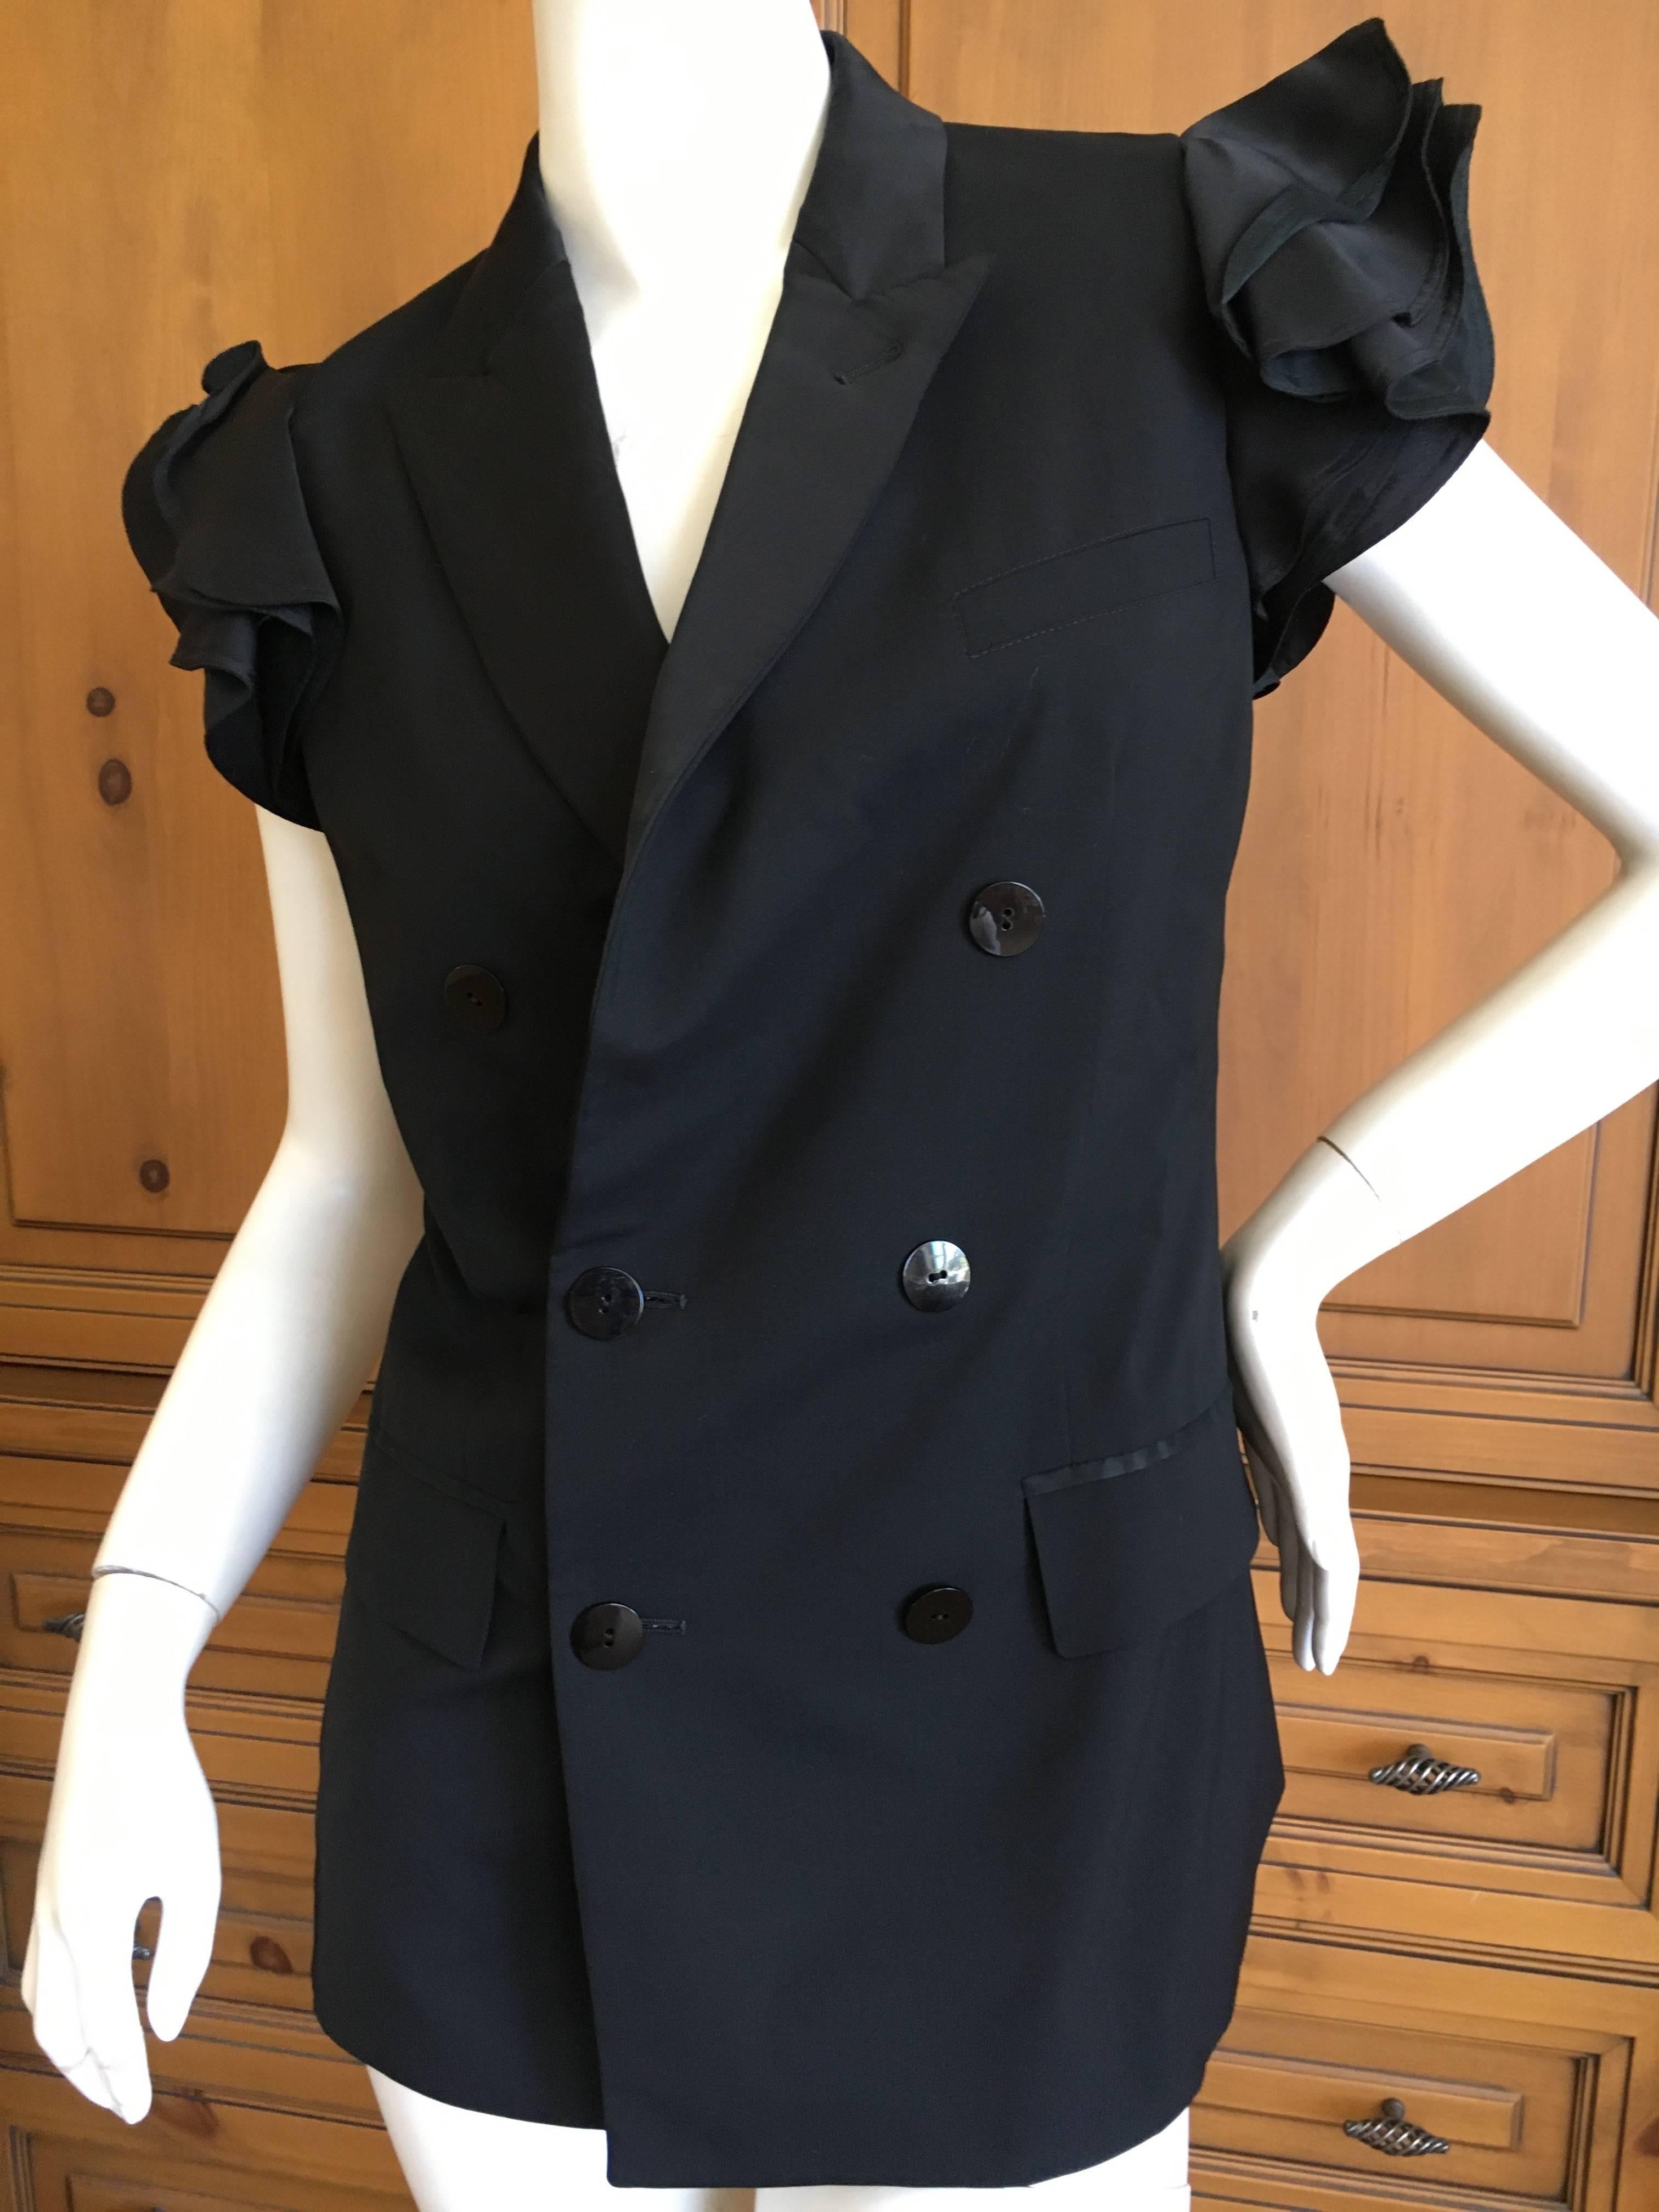 Jean Paul Gaultier Black Sleeveless Double Breasted Jacket with Ruffles.
Size 36
Bust 36